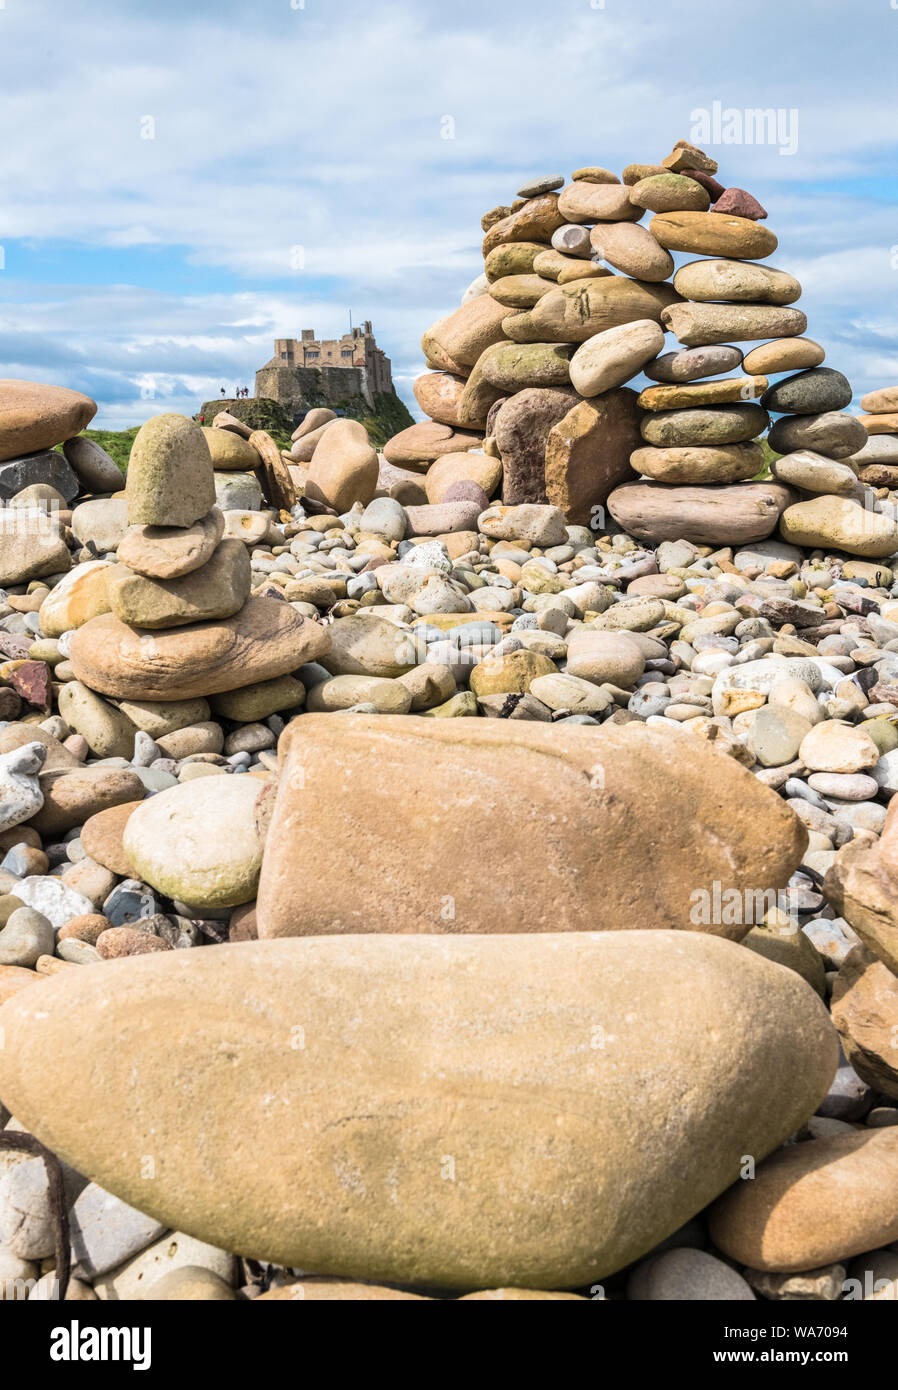 Stone art, fine balancing of stones on top of each other on The Holy Island of Lindisfarne, Northumberland, England. Stock Photo